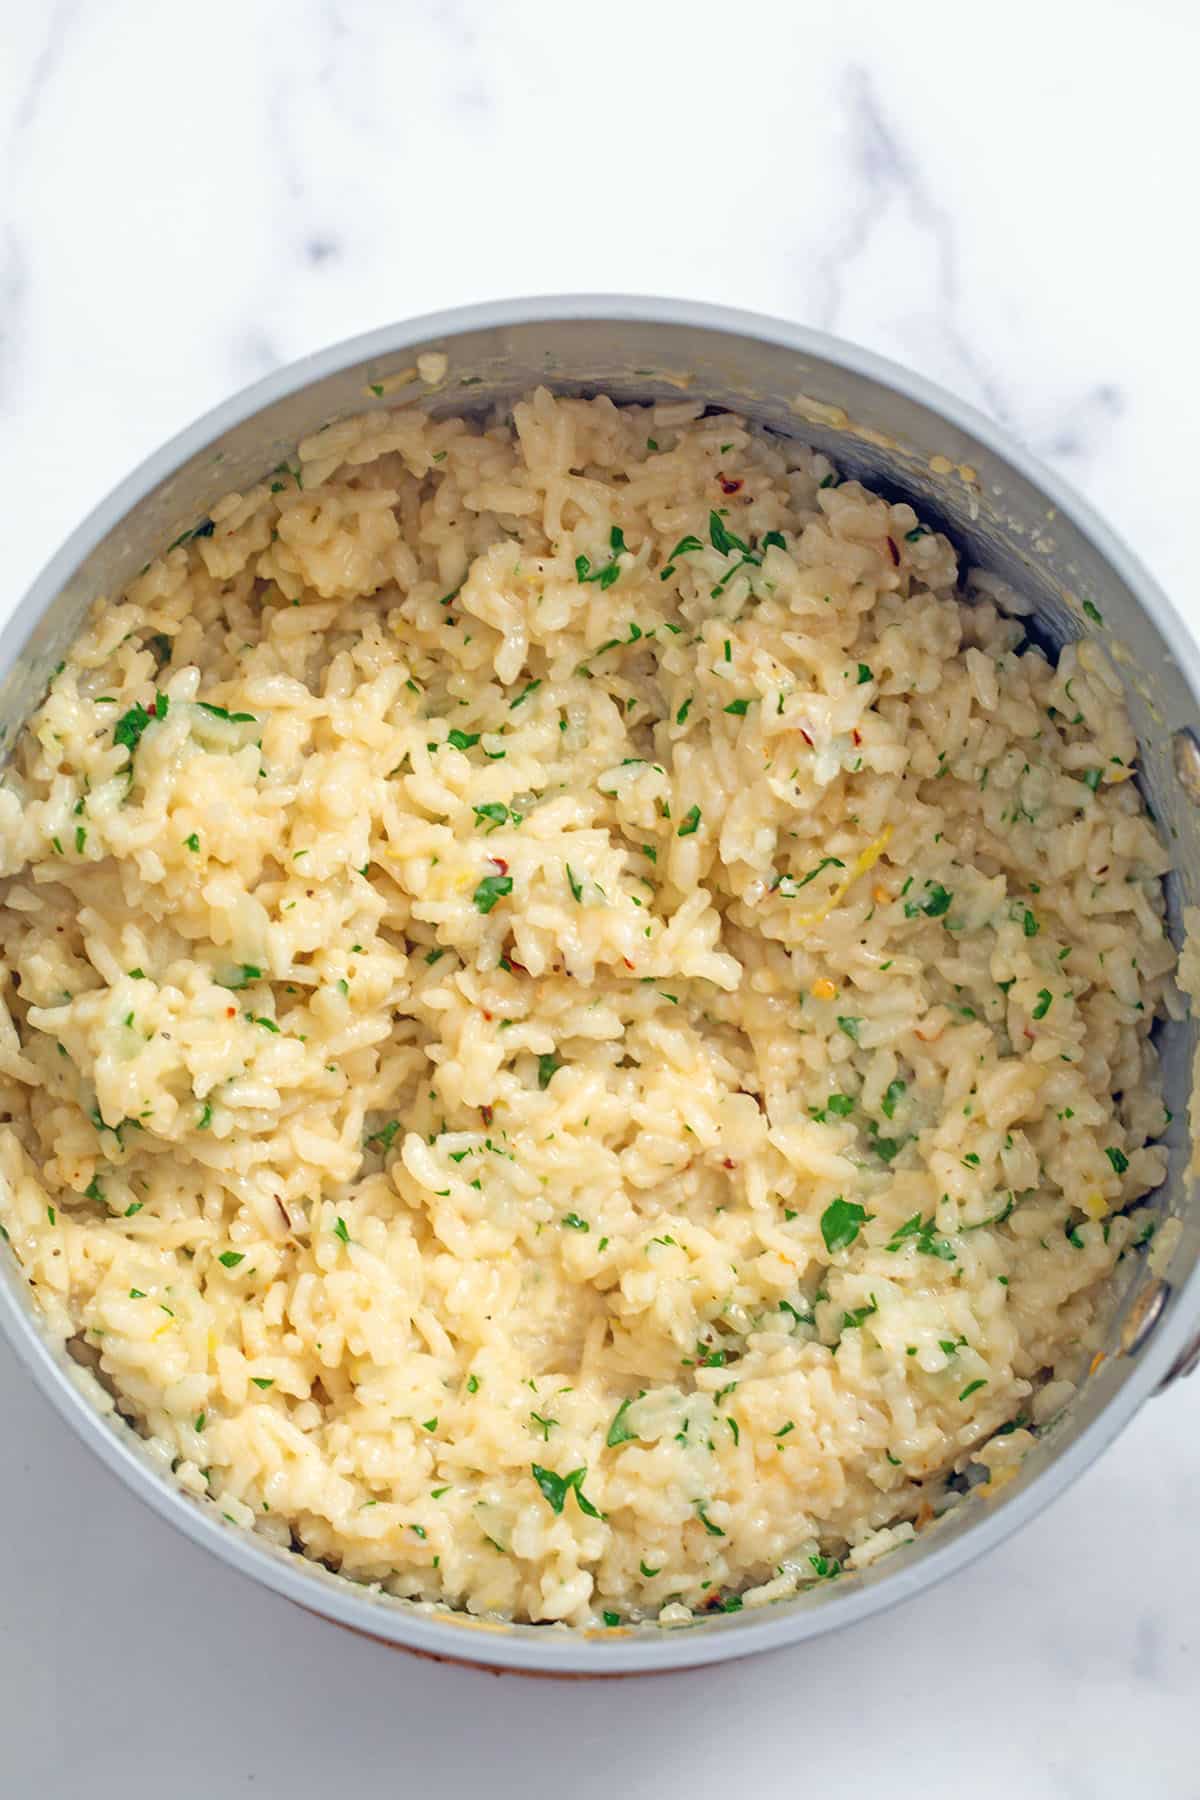 Risotto in saucepan with parsley, parmesan, and seasoning mixed in.